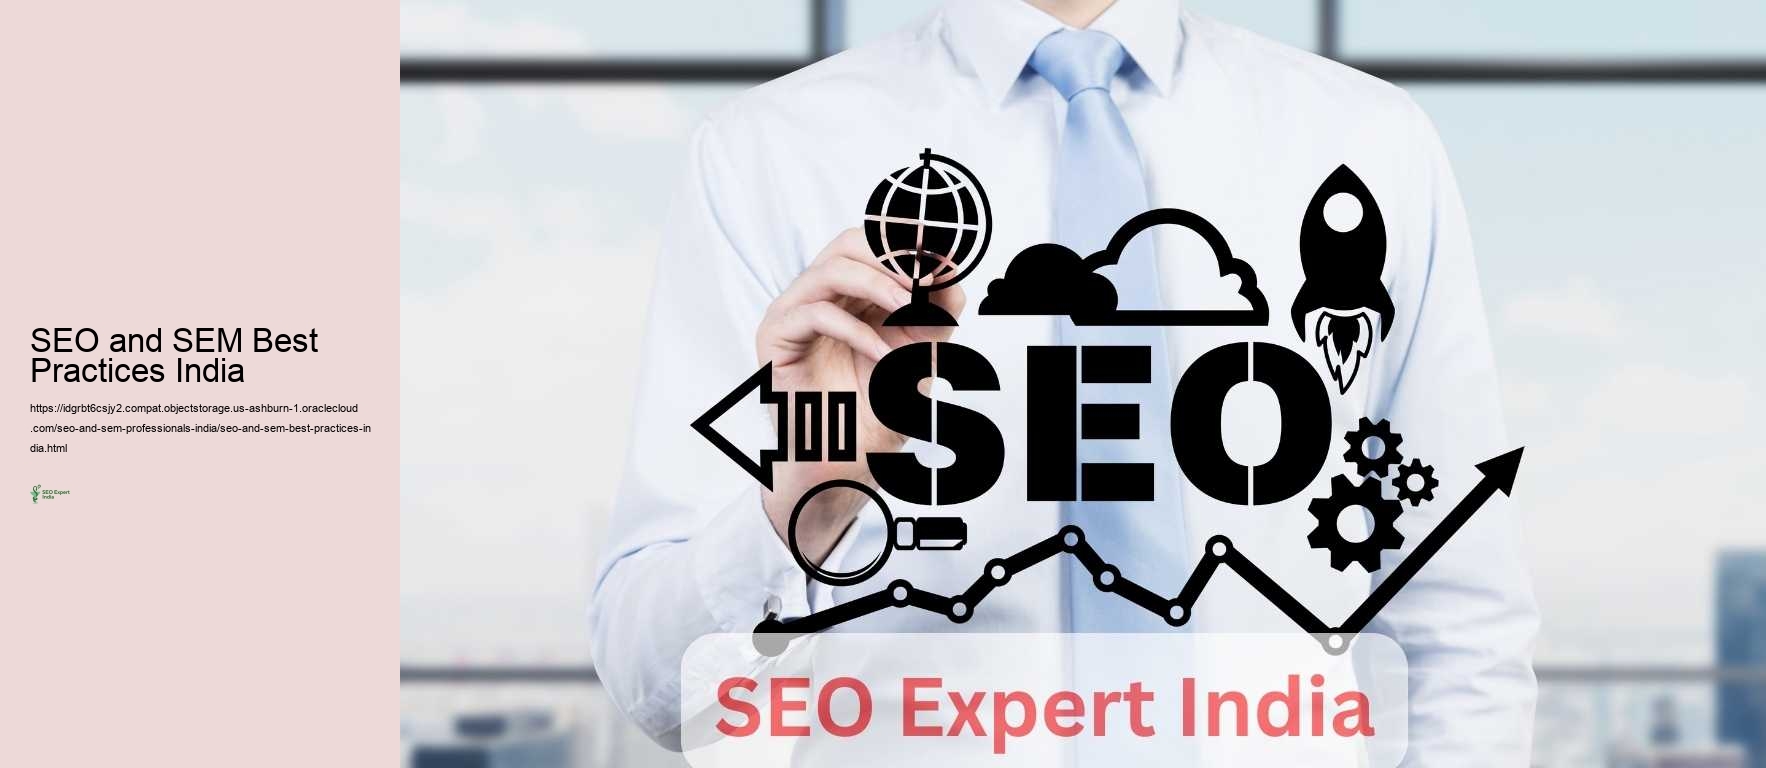 SEO and SEM Best Practices India